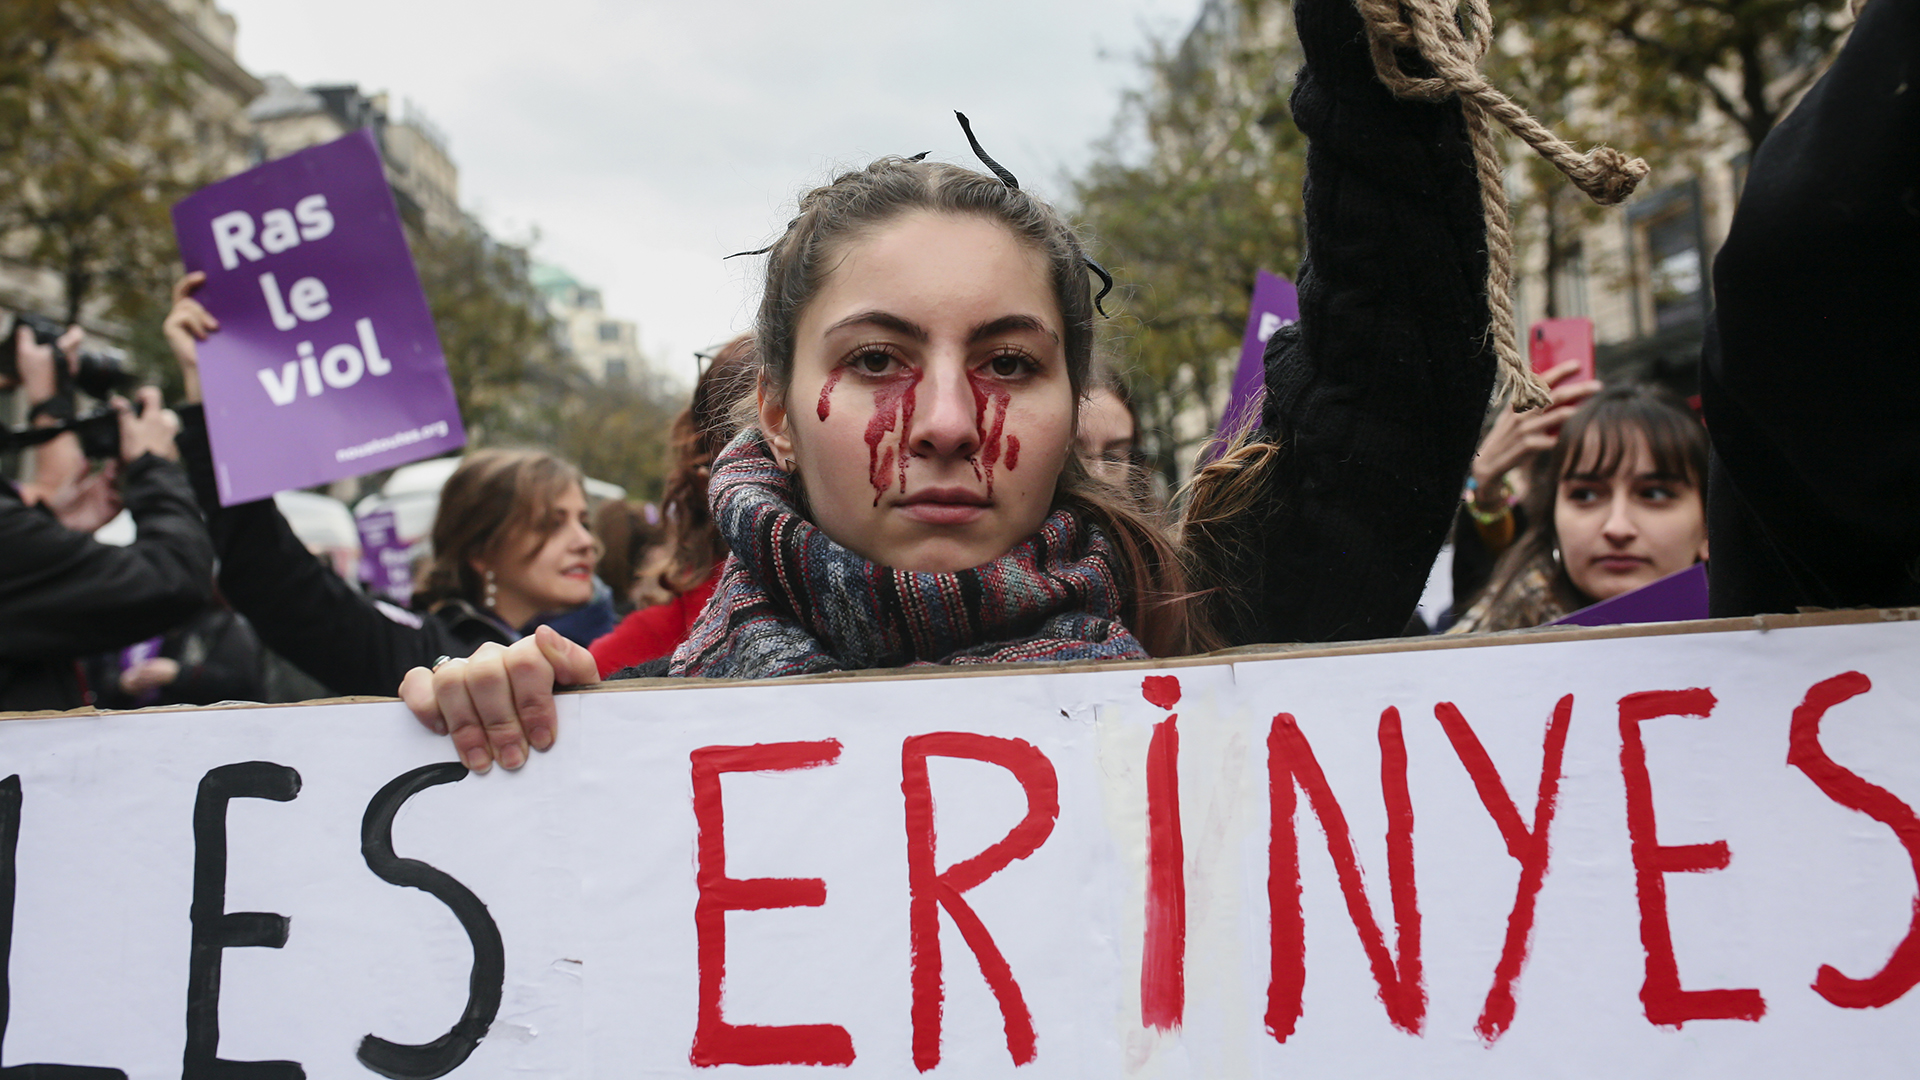 ONLY FOR FEATURE: Why has it been such a deadly year for French women? by Megan Clement [DON''T USE]